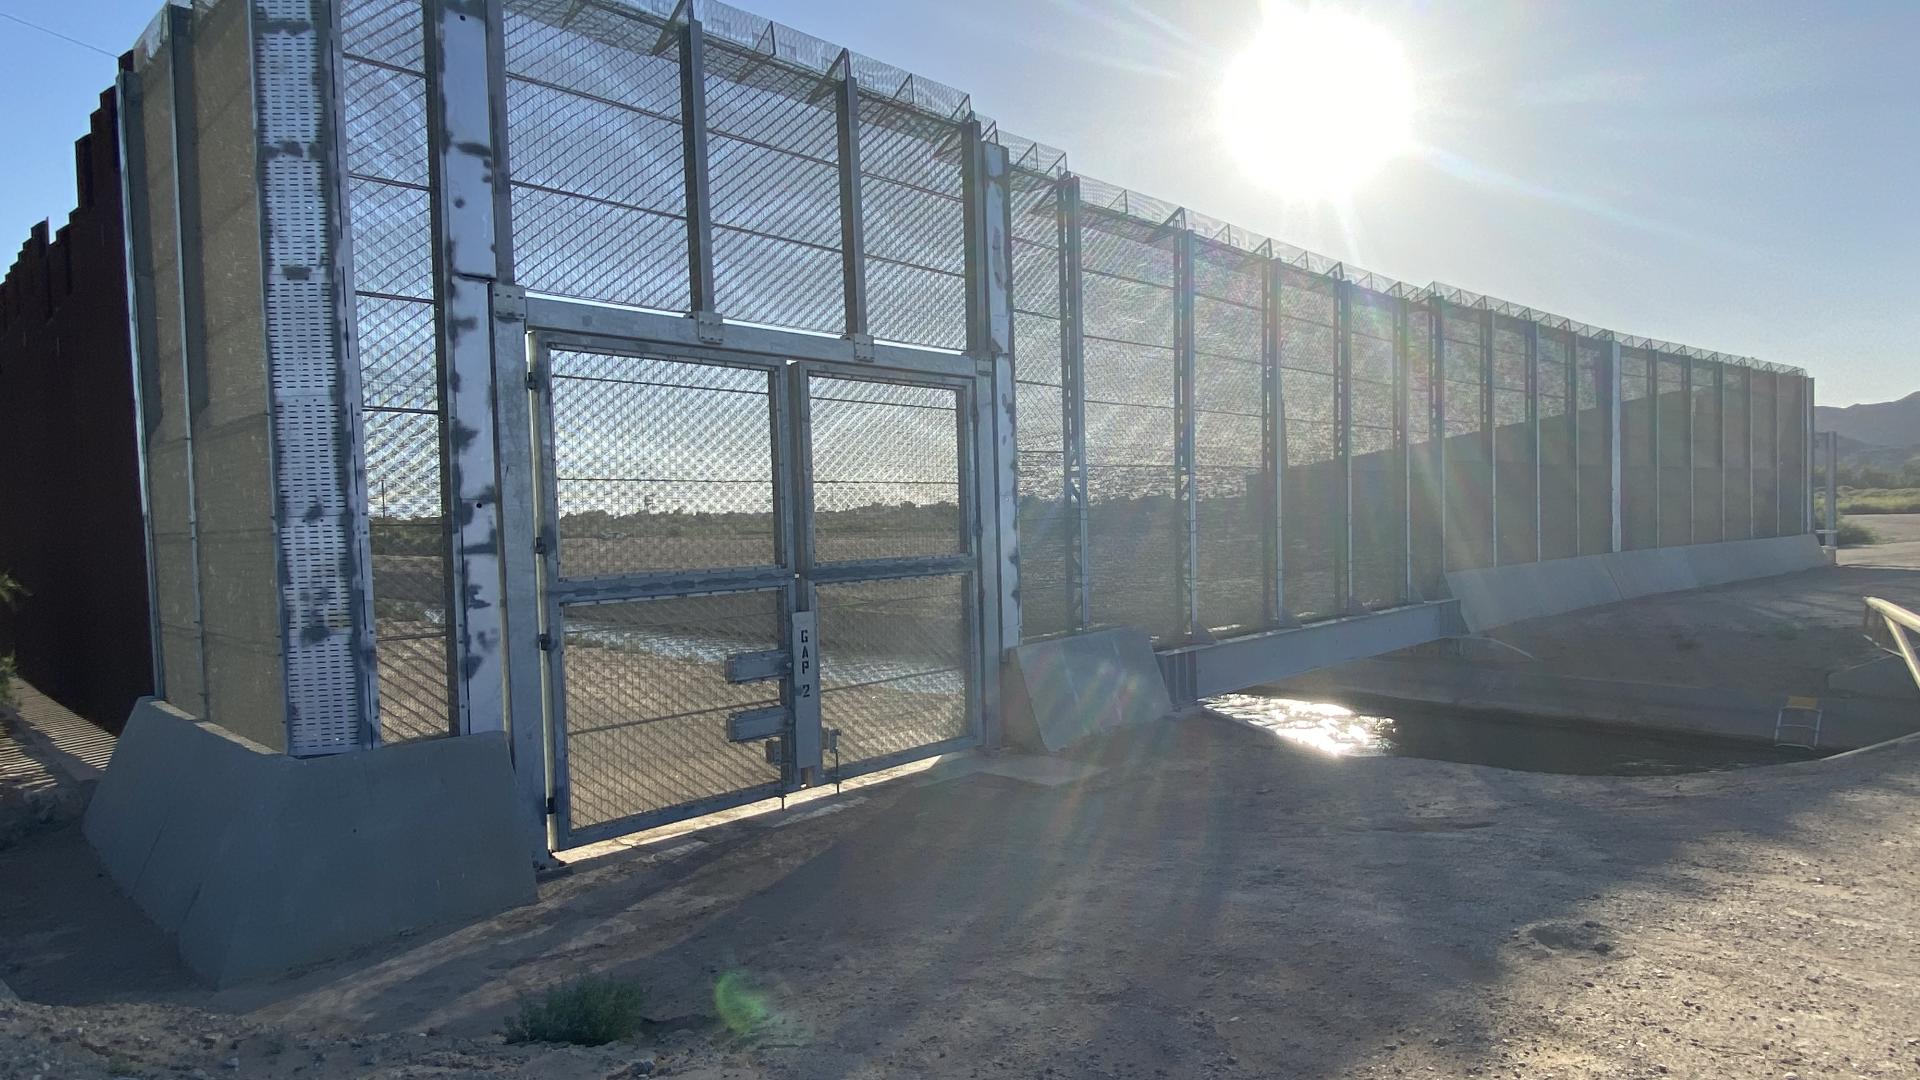 Yuma border wall a year after Title 42 ended.